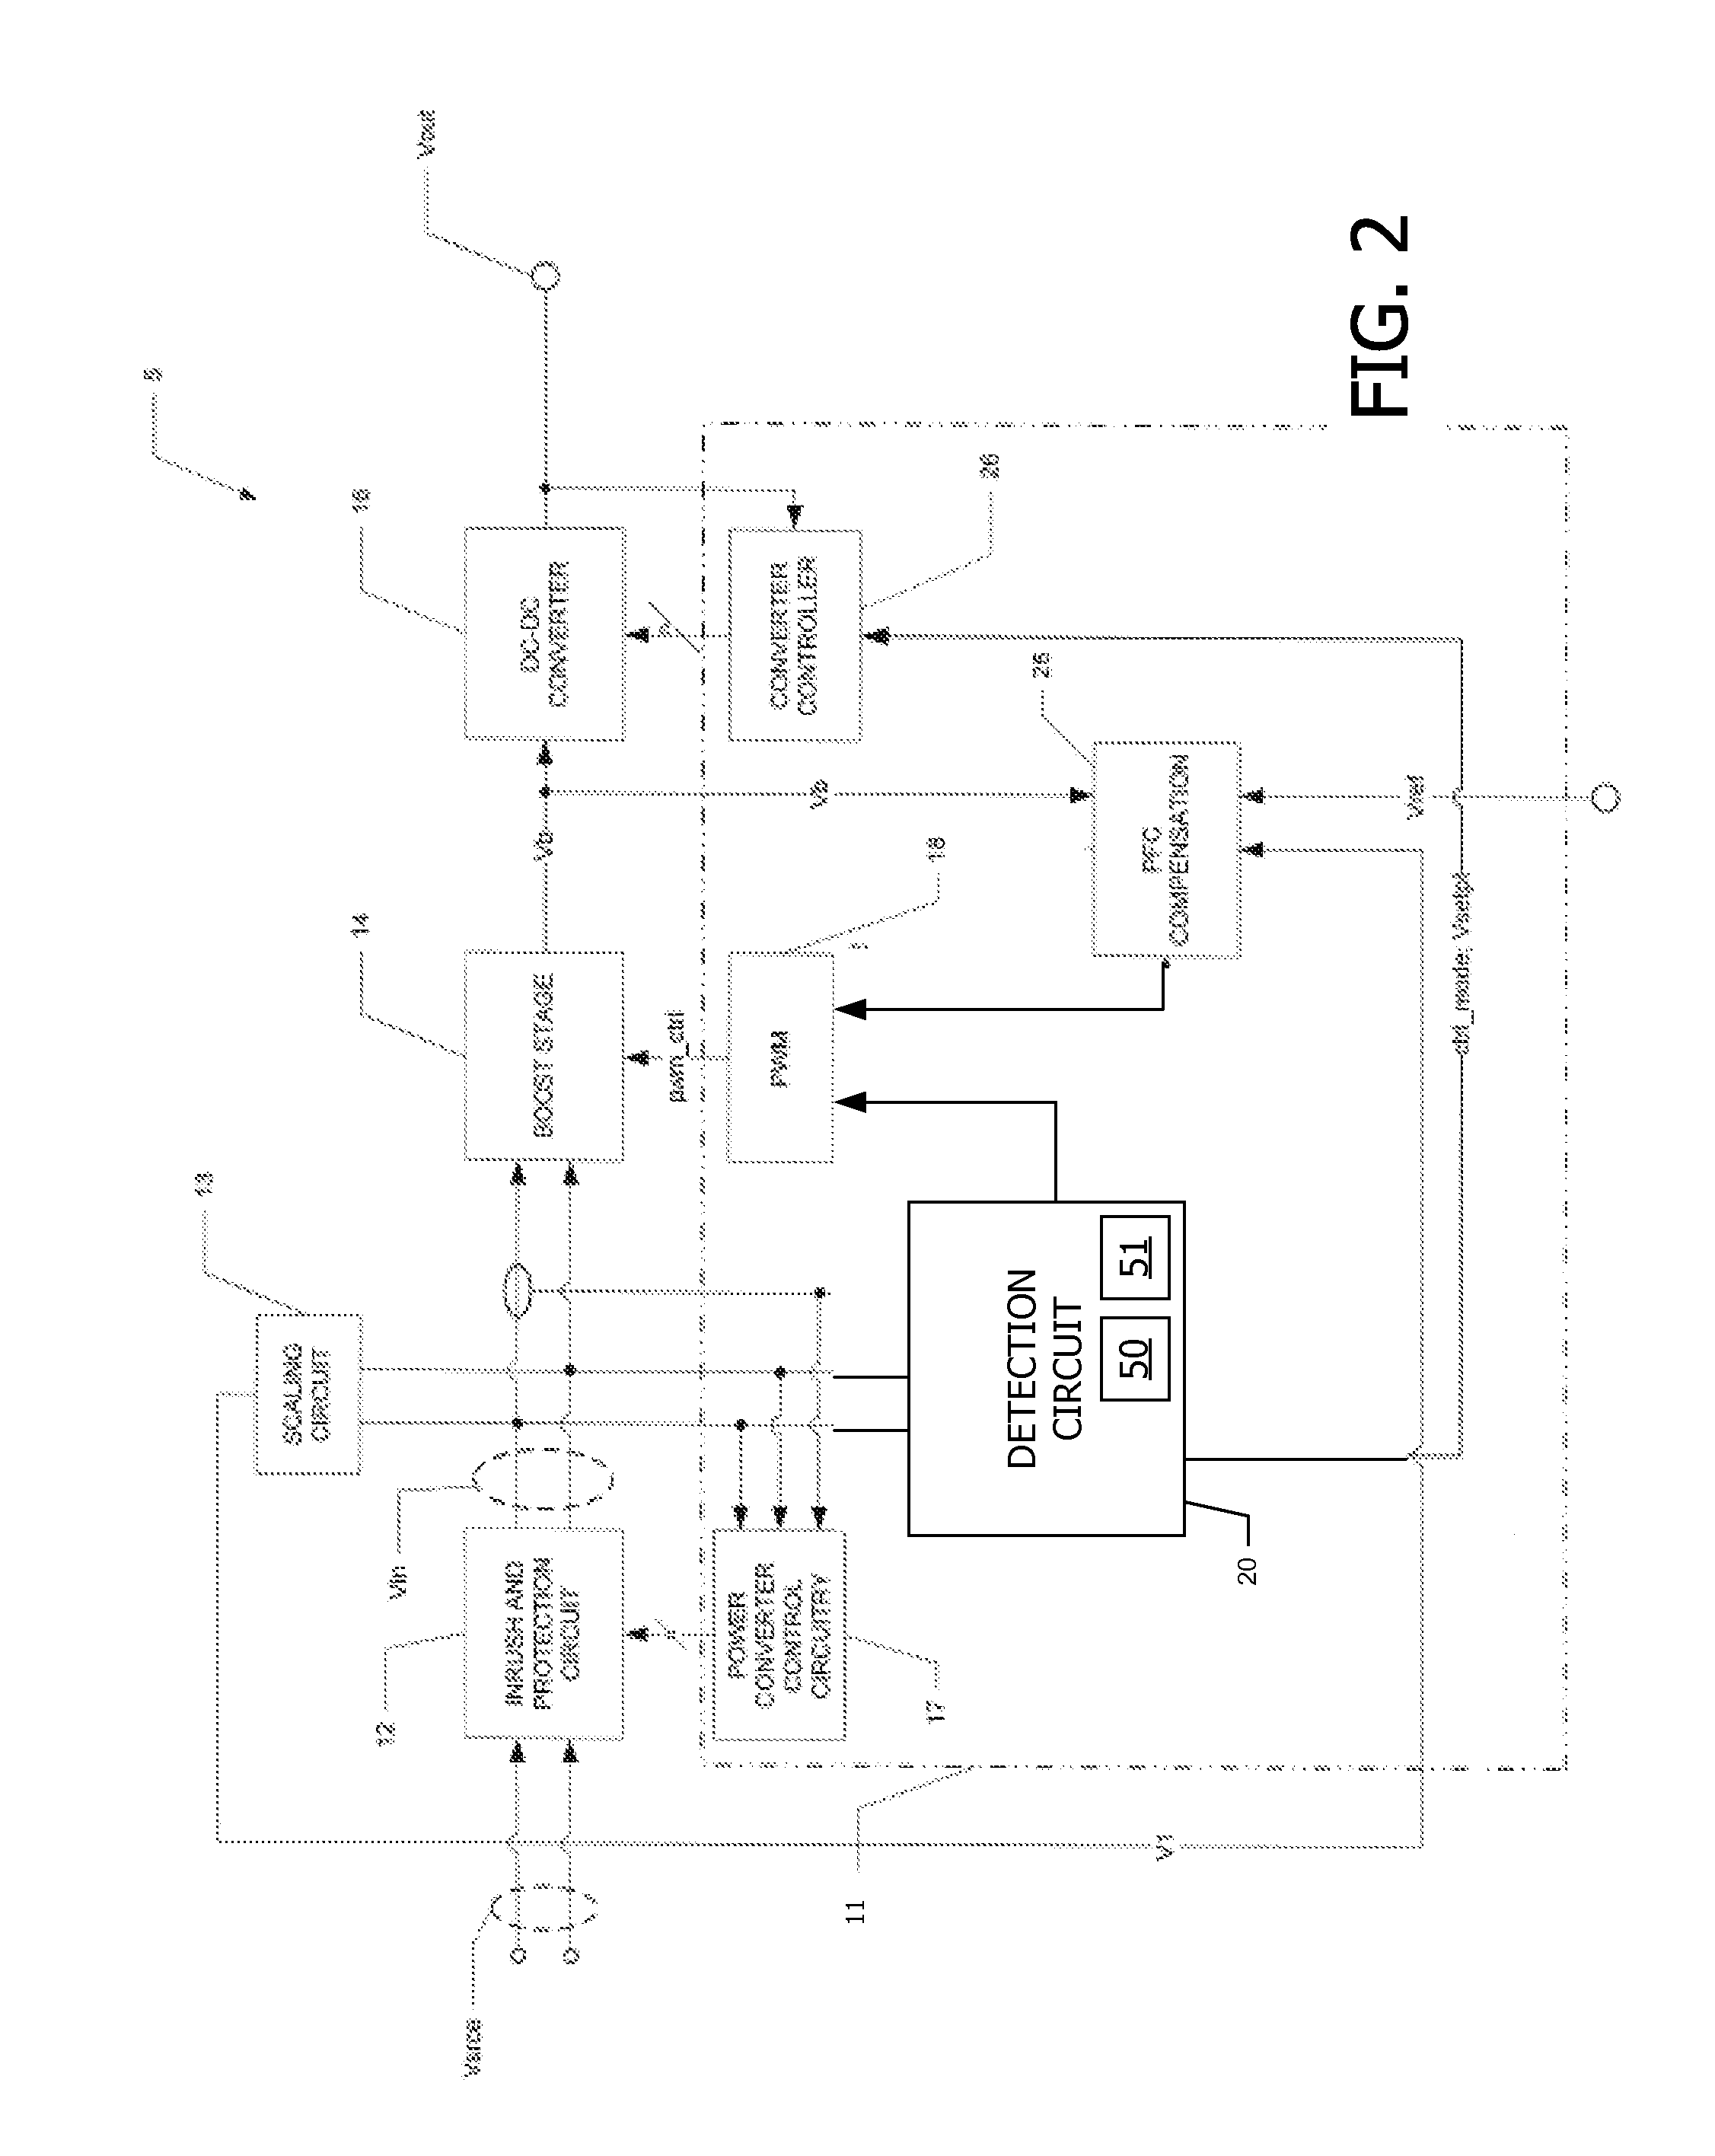 Power converter and methods for increasing power delivery of soft alternating current power source